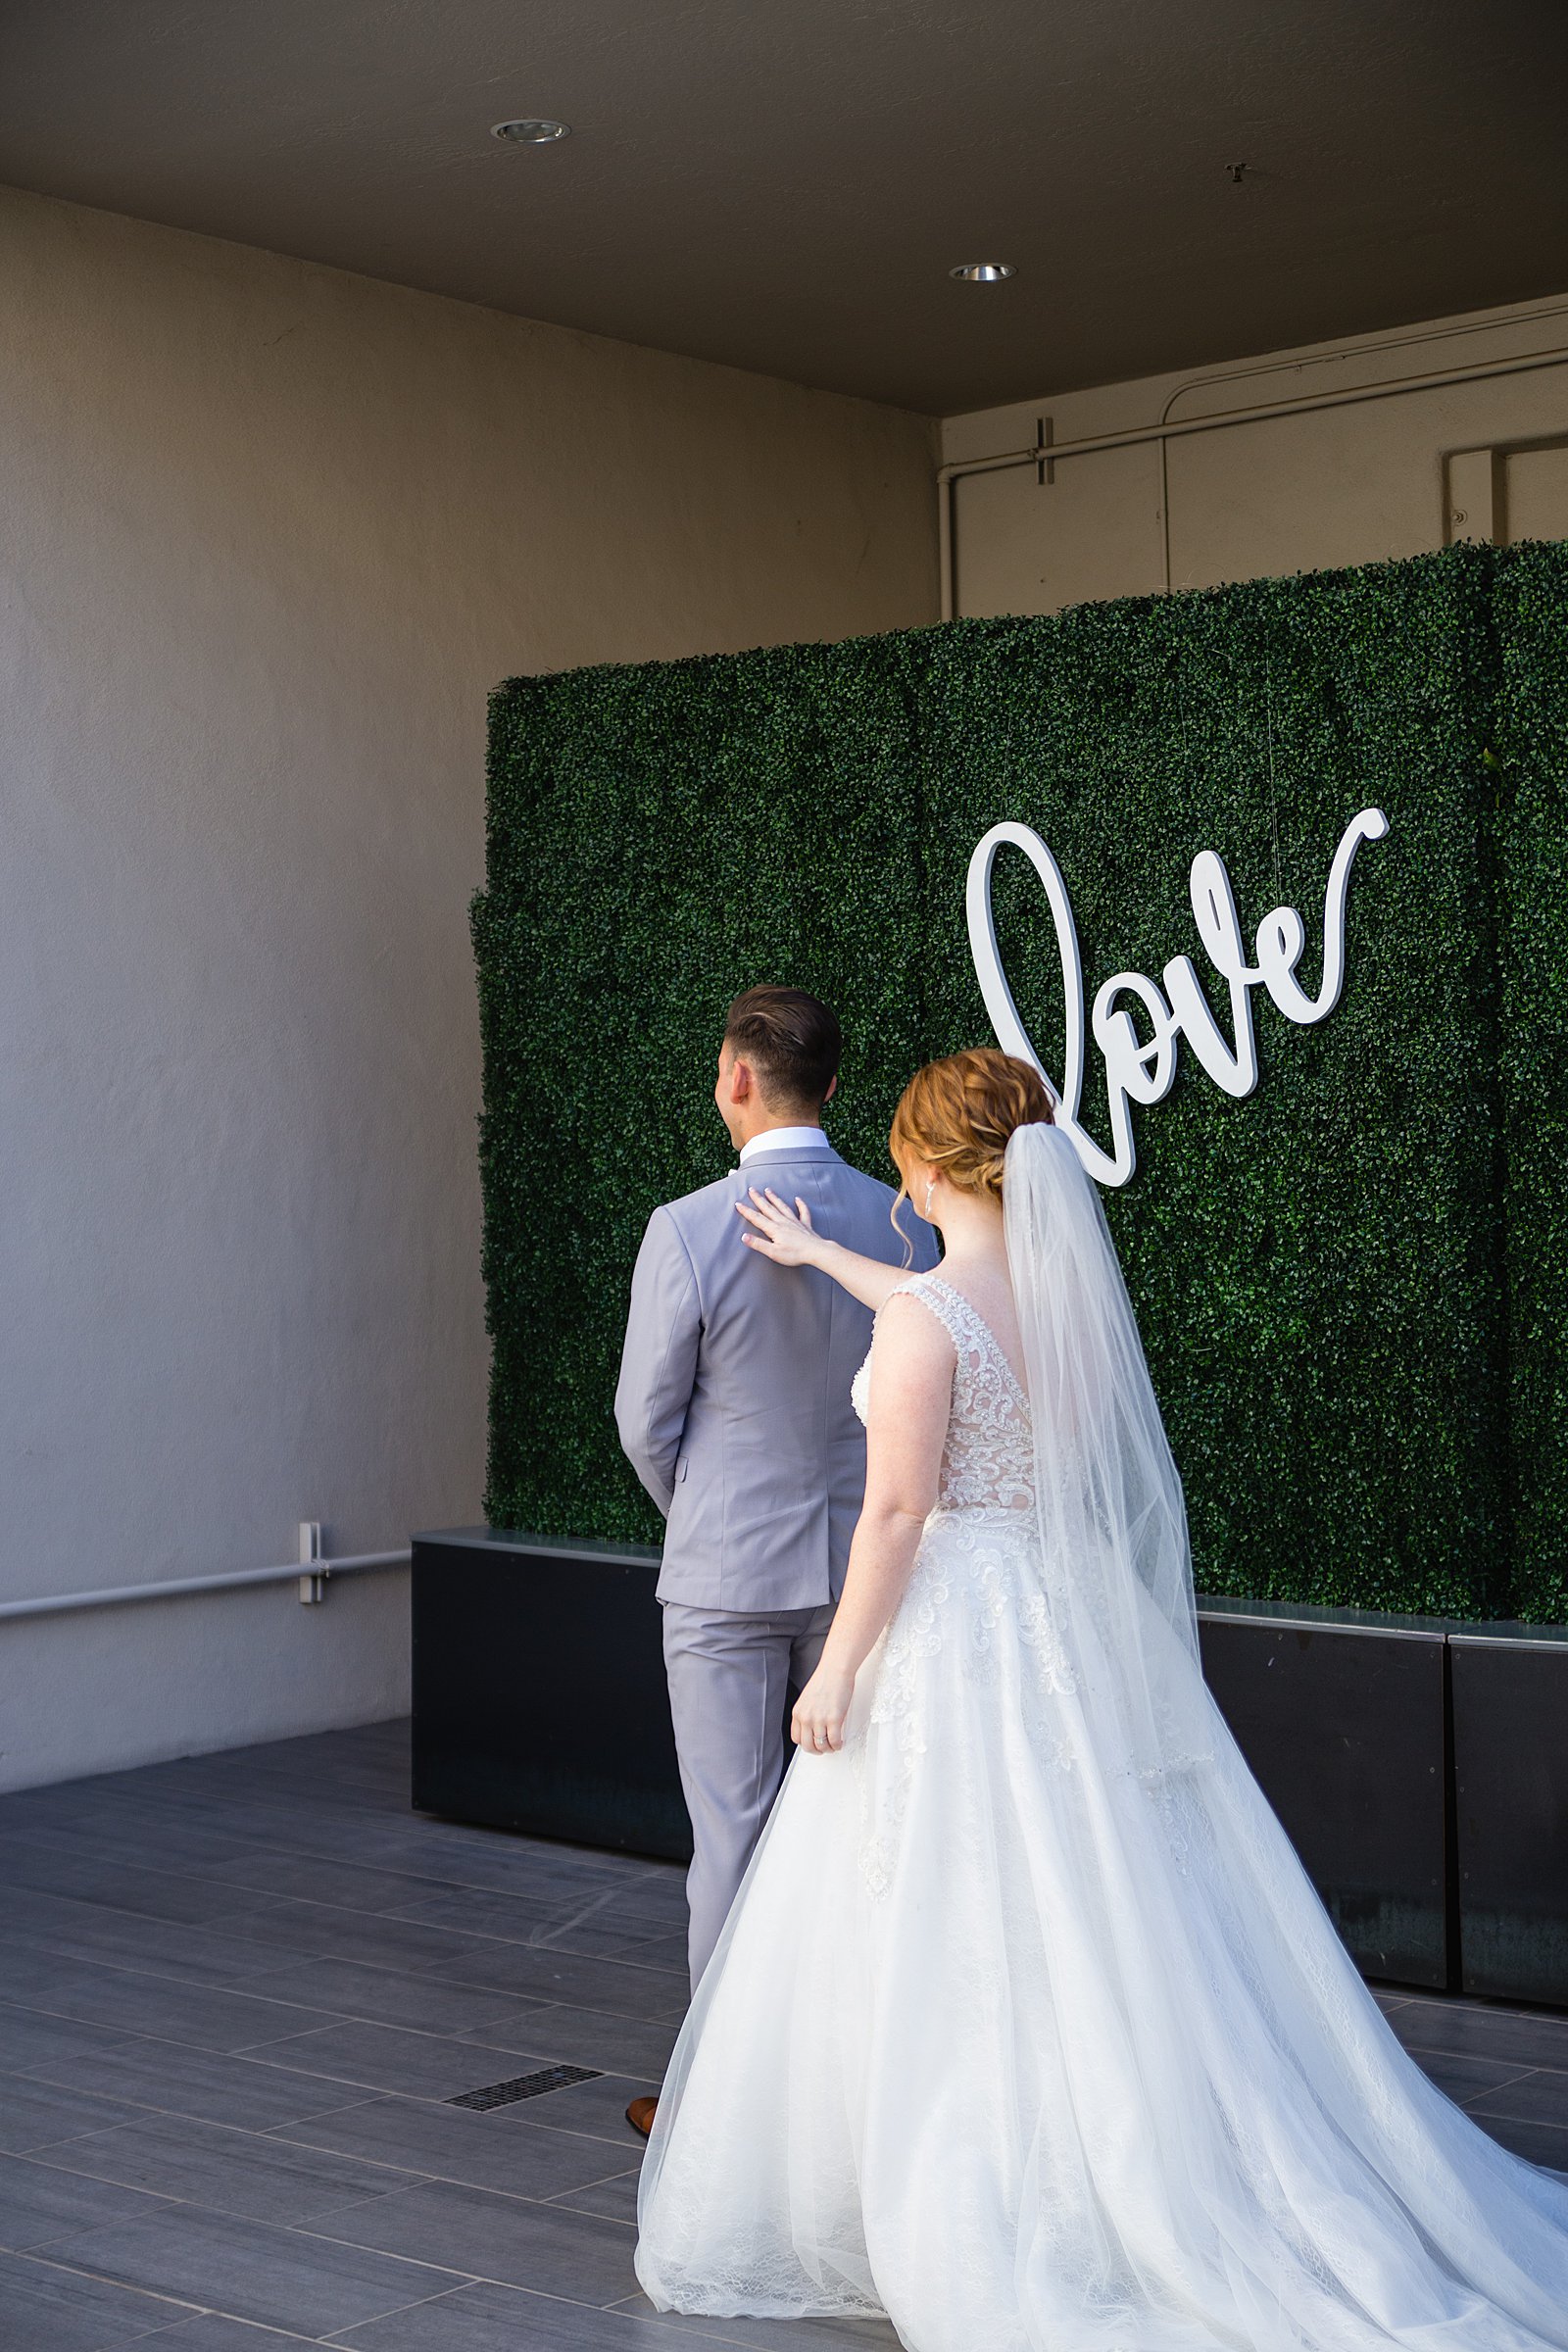 Bride and Groom's first look at SoHo63 by Phoenix wedding photographer PMA Photography.